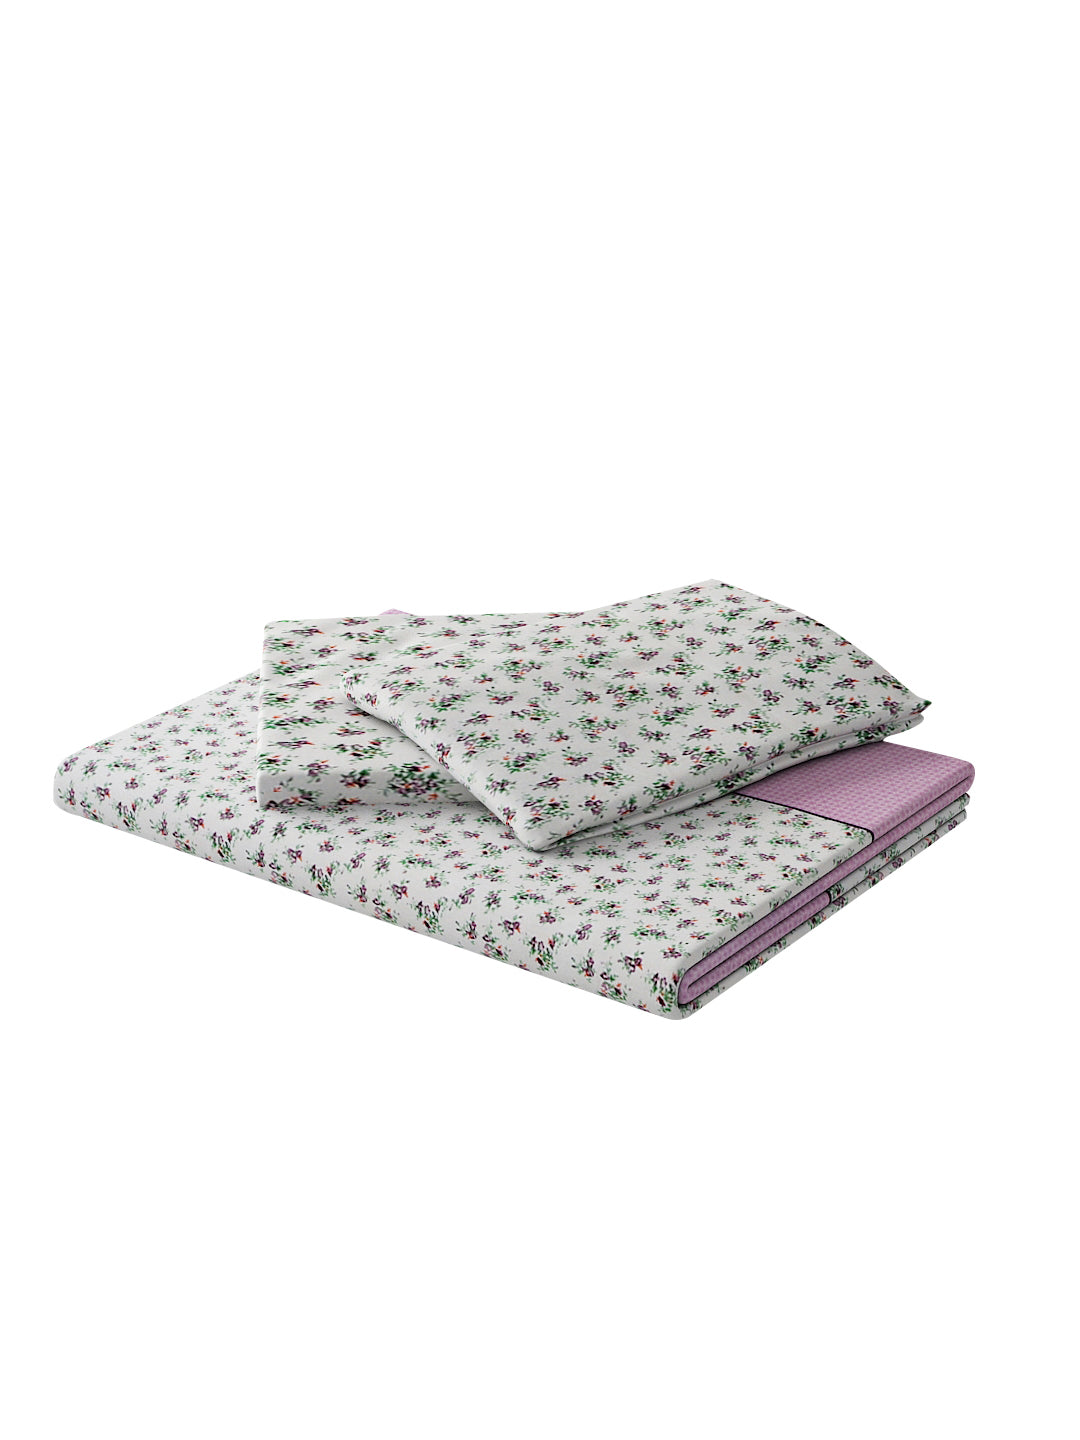 180 TC Double Bed Cotton Bedsheet with 2 Pillow Covers-Multicolor Pink